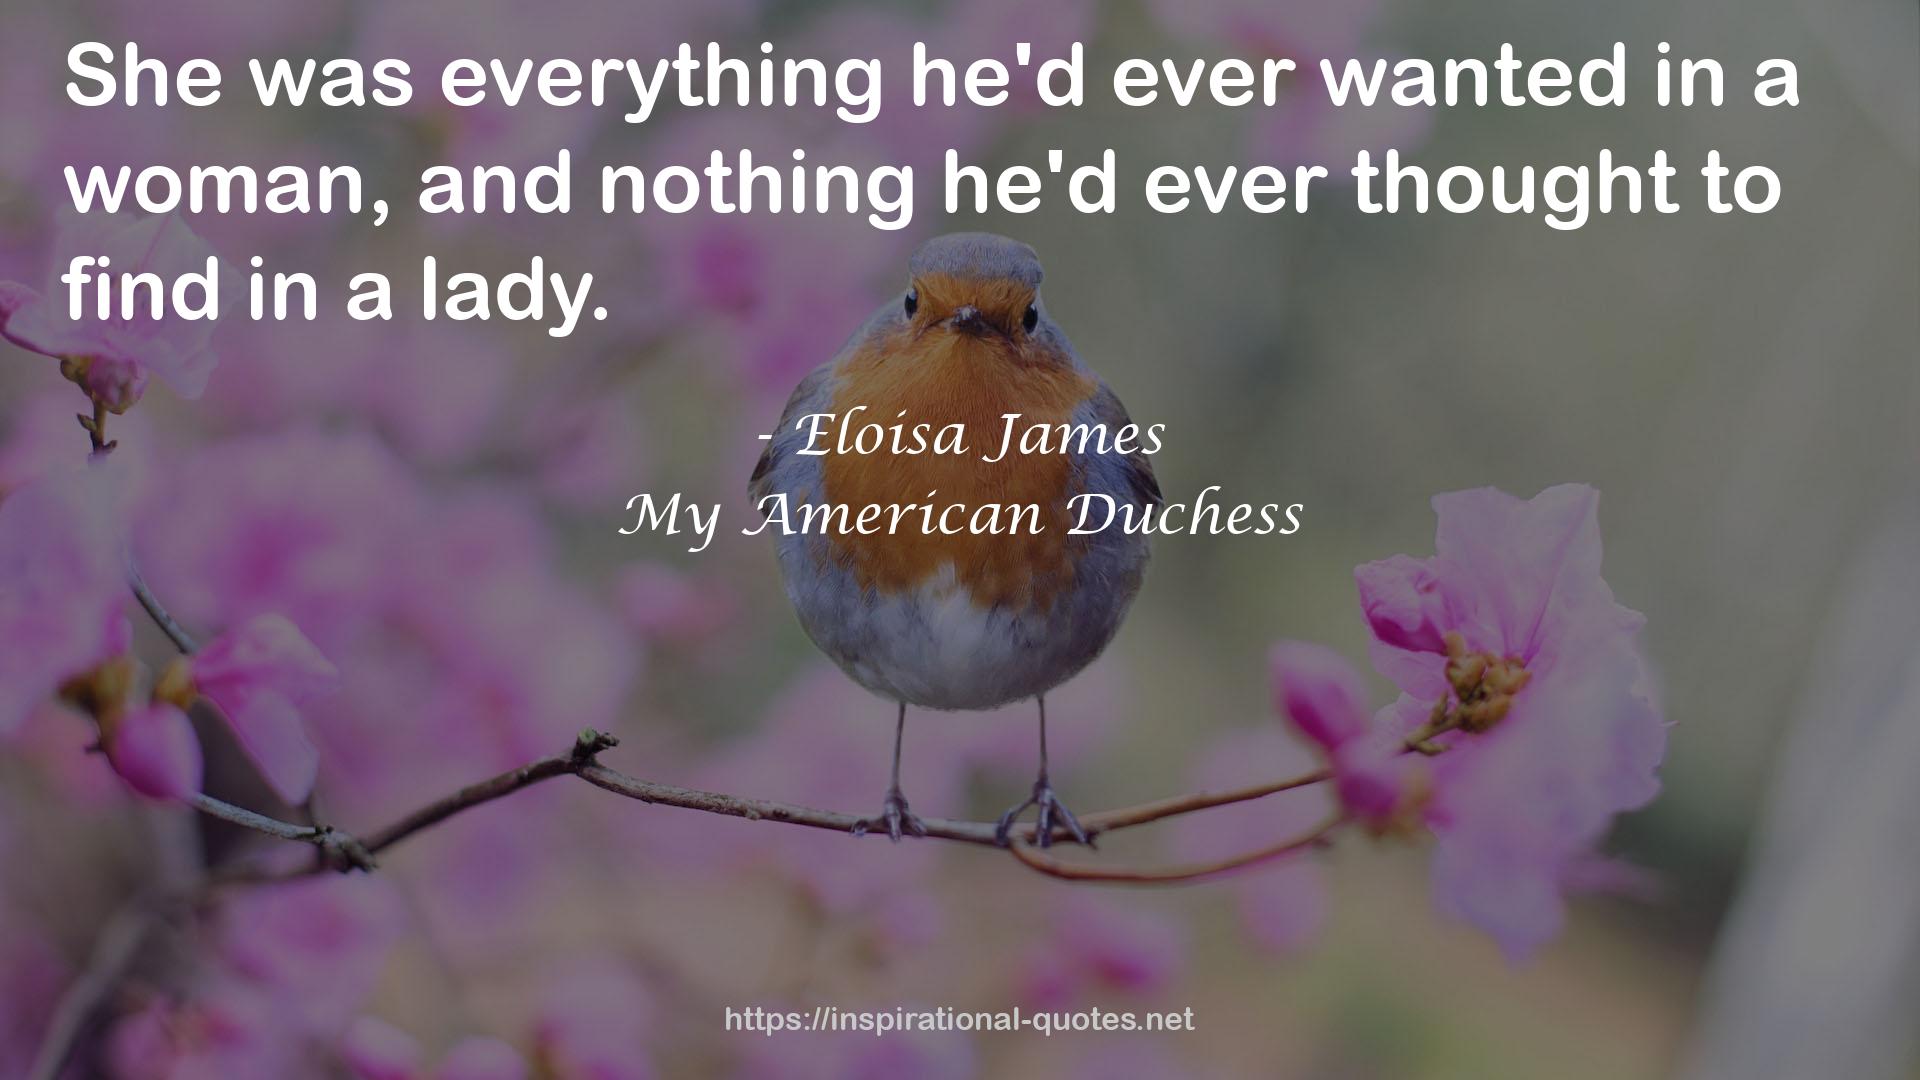 My American Duchess QUOTES